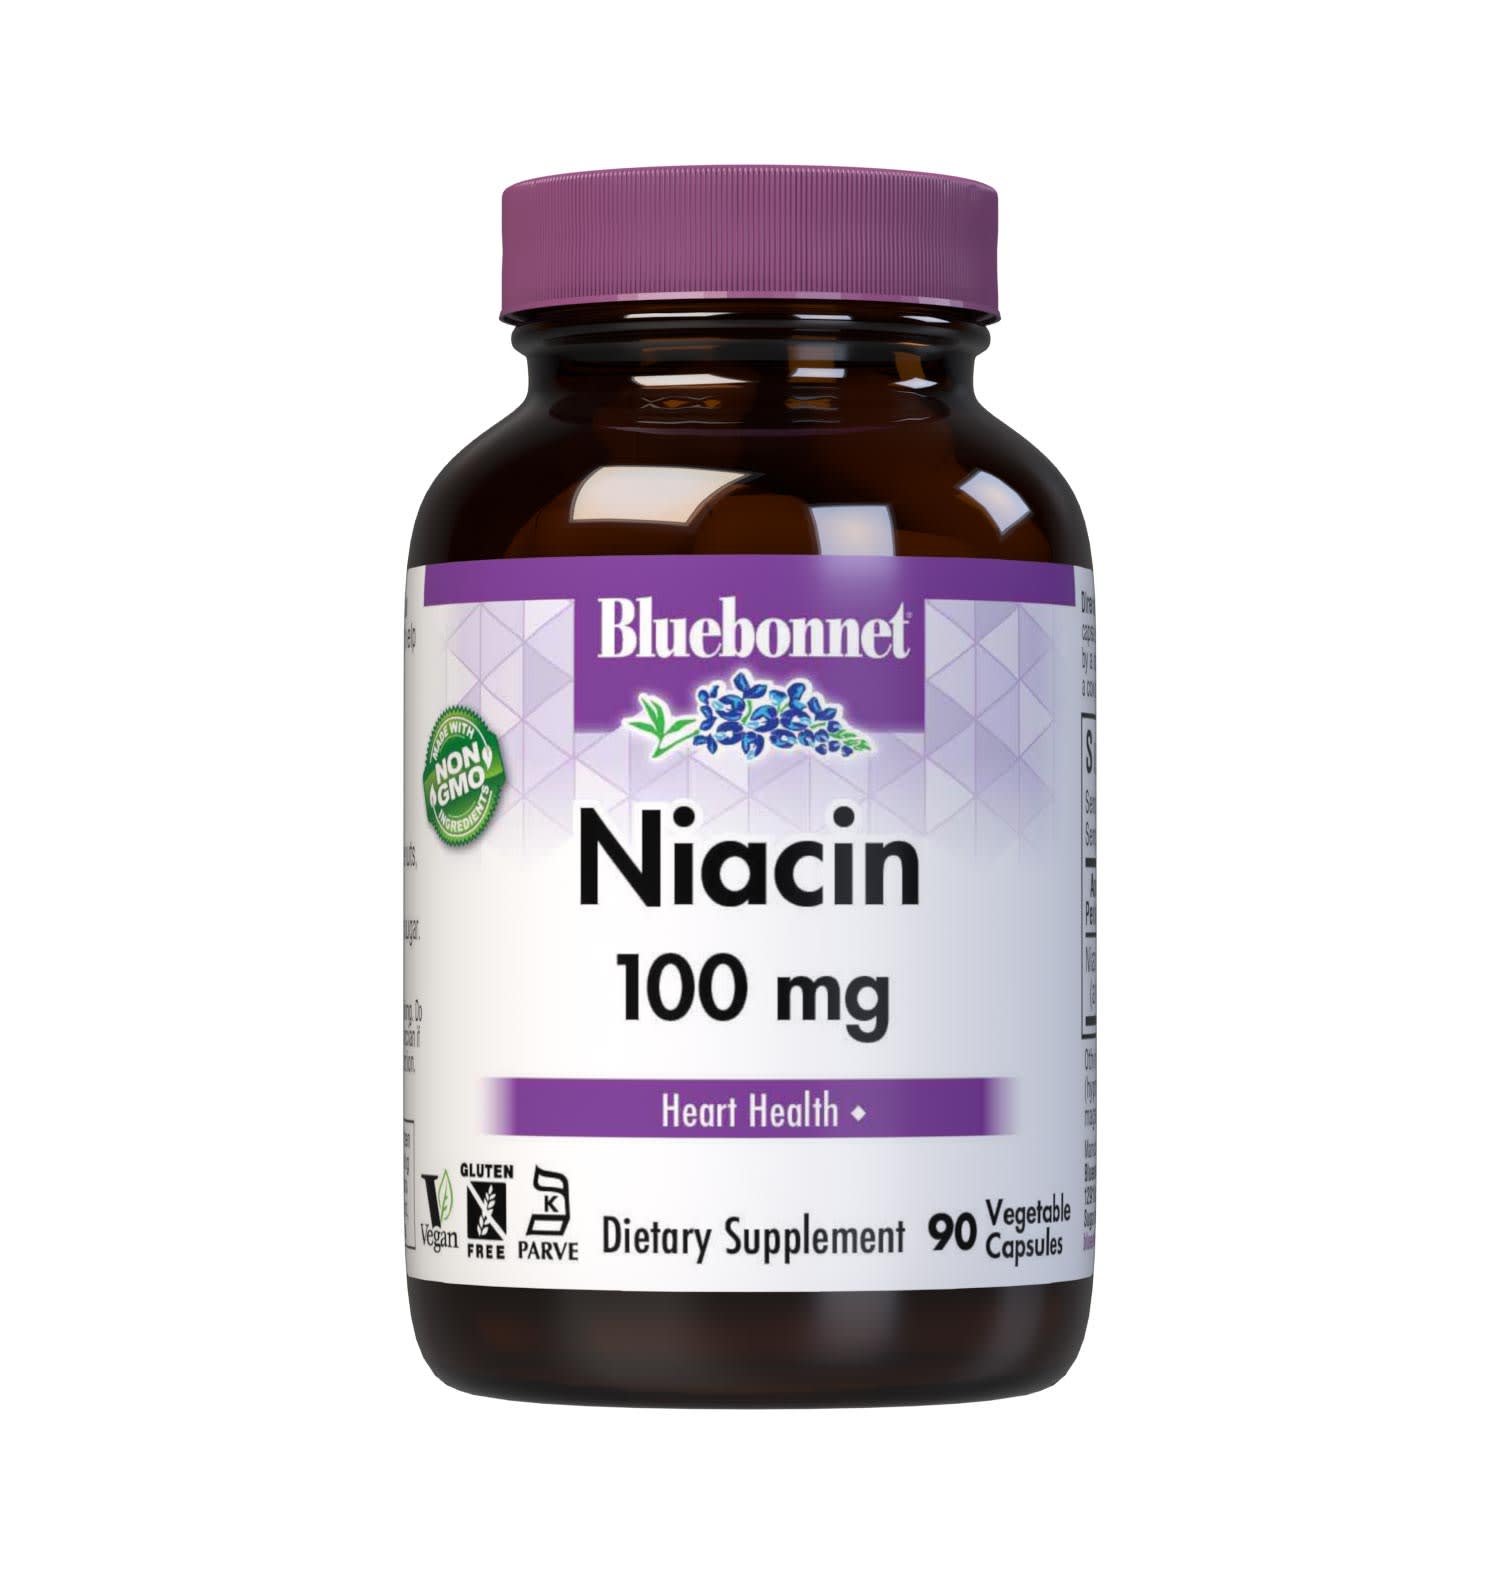 Bluebonnet’s Niacin 100 mg Vegetable Capsules are formulated with yeast-free nicotinic acid in its crystalline form to help support cardiovascular health.  #size_90 count